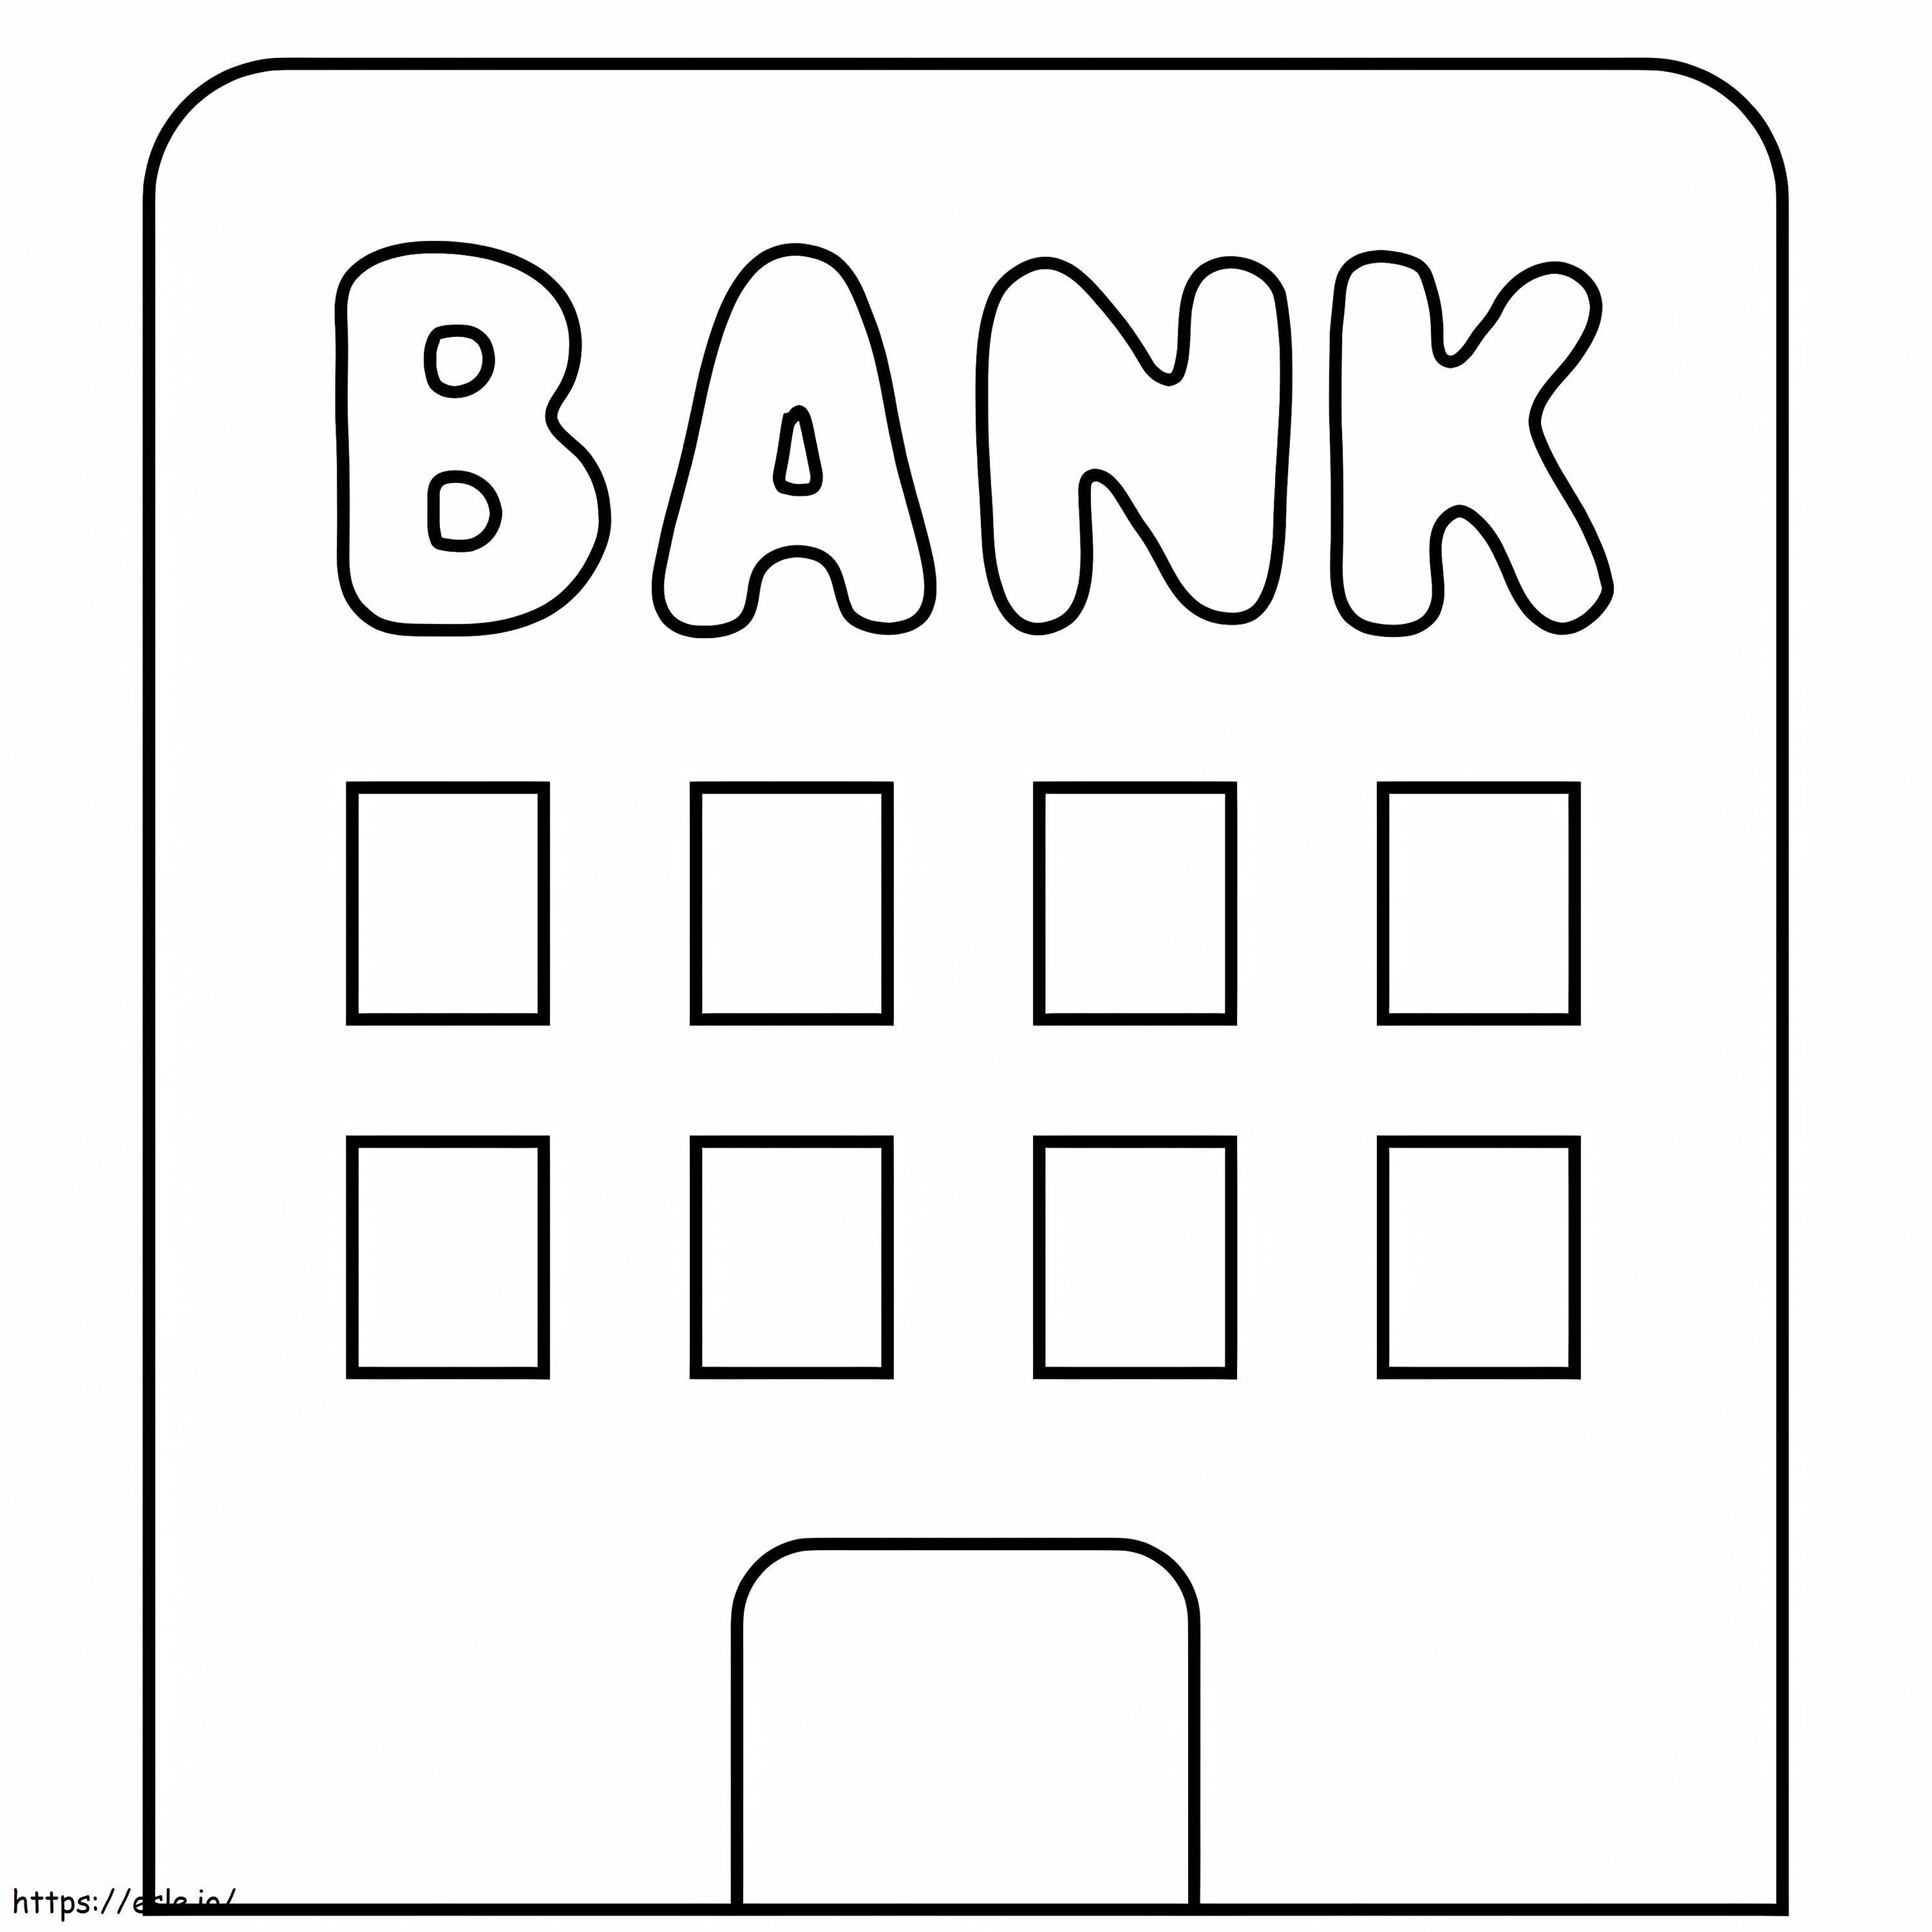 Simple Bank coloring page